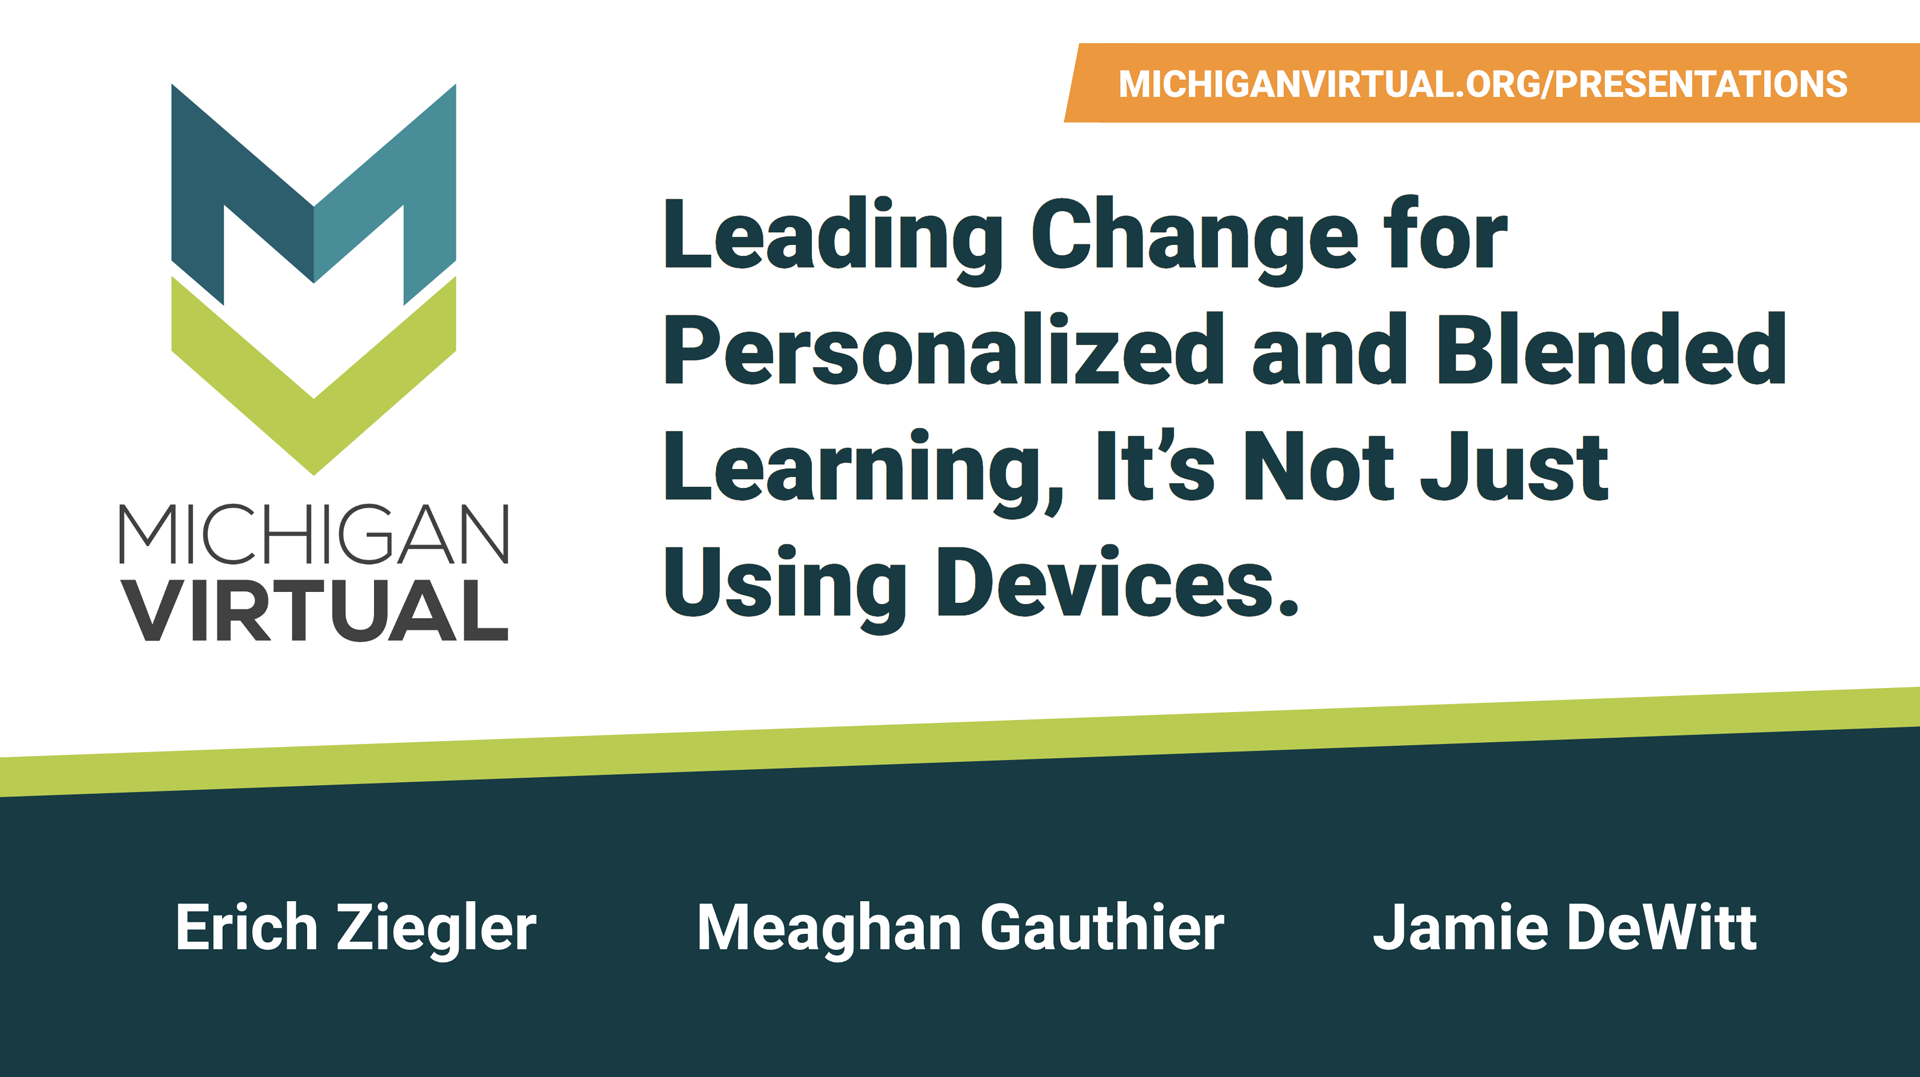 Leading Change for Personalized and Blended Learning, It's Not Just Using Devices